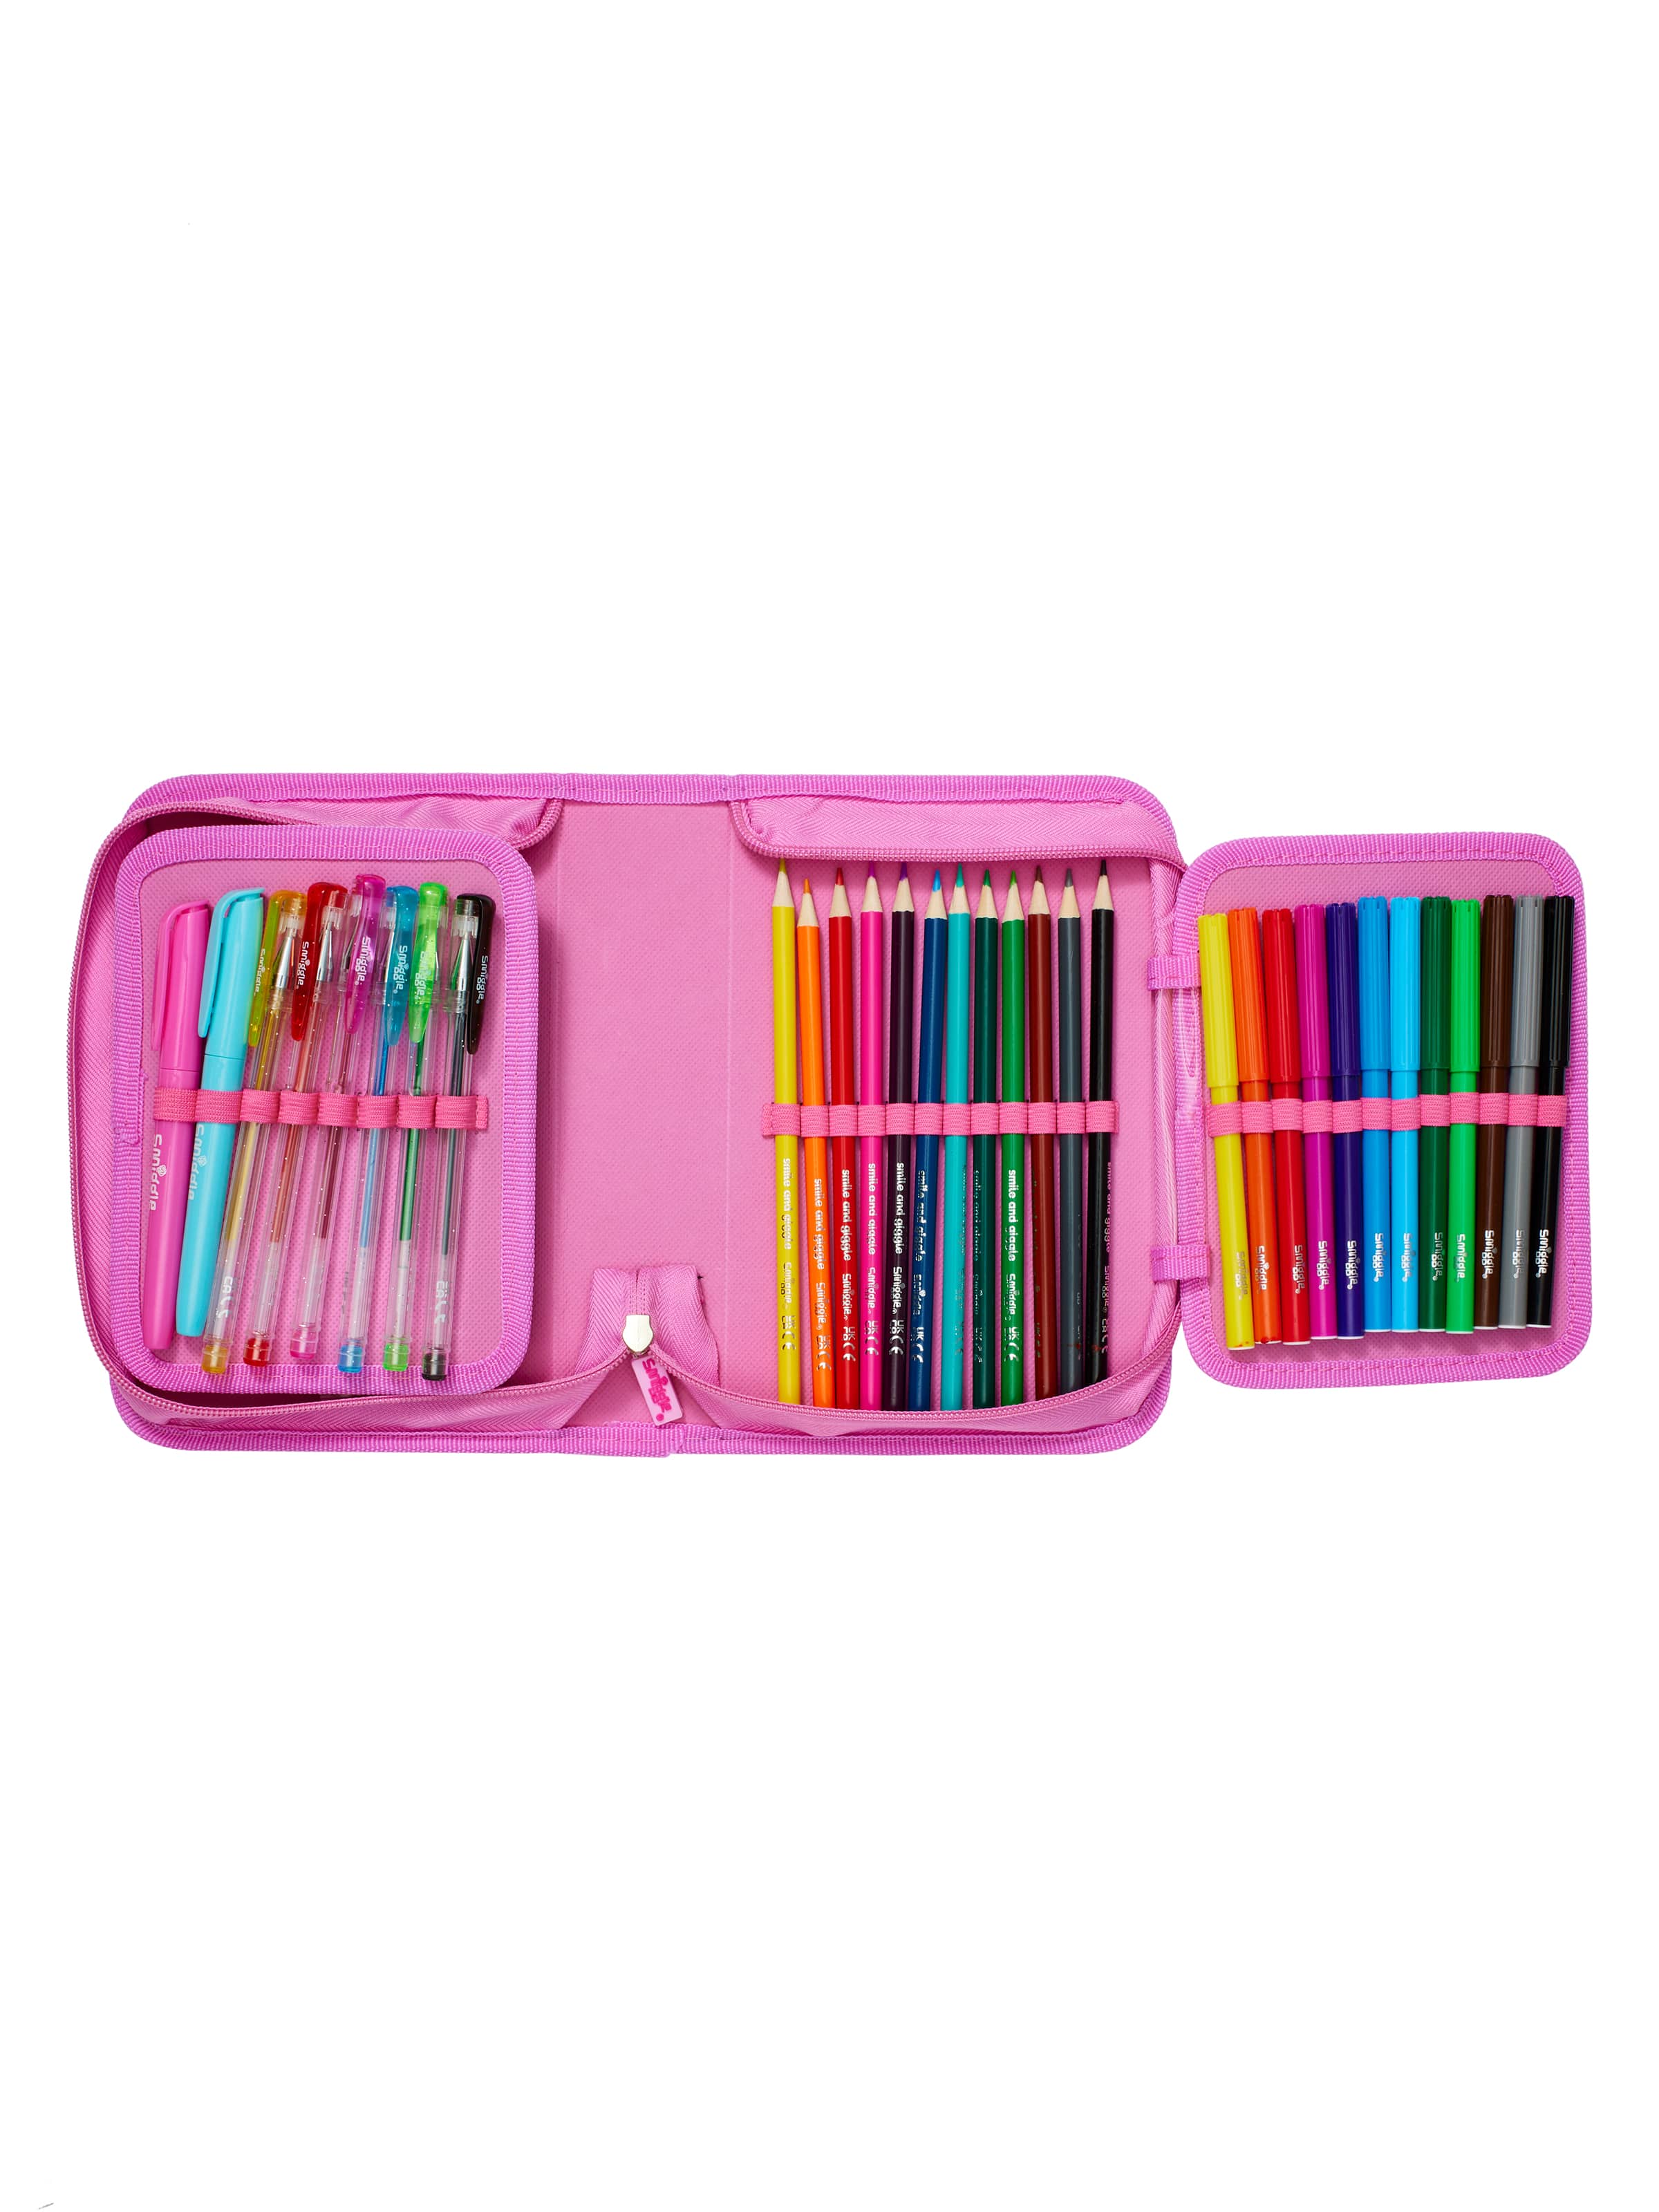 ZIPIT Beast - Pony Pencil Box for Kids, Cute Storage Case for School  Supplies, Secure Zipper Closure (Pony) 